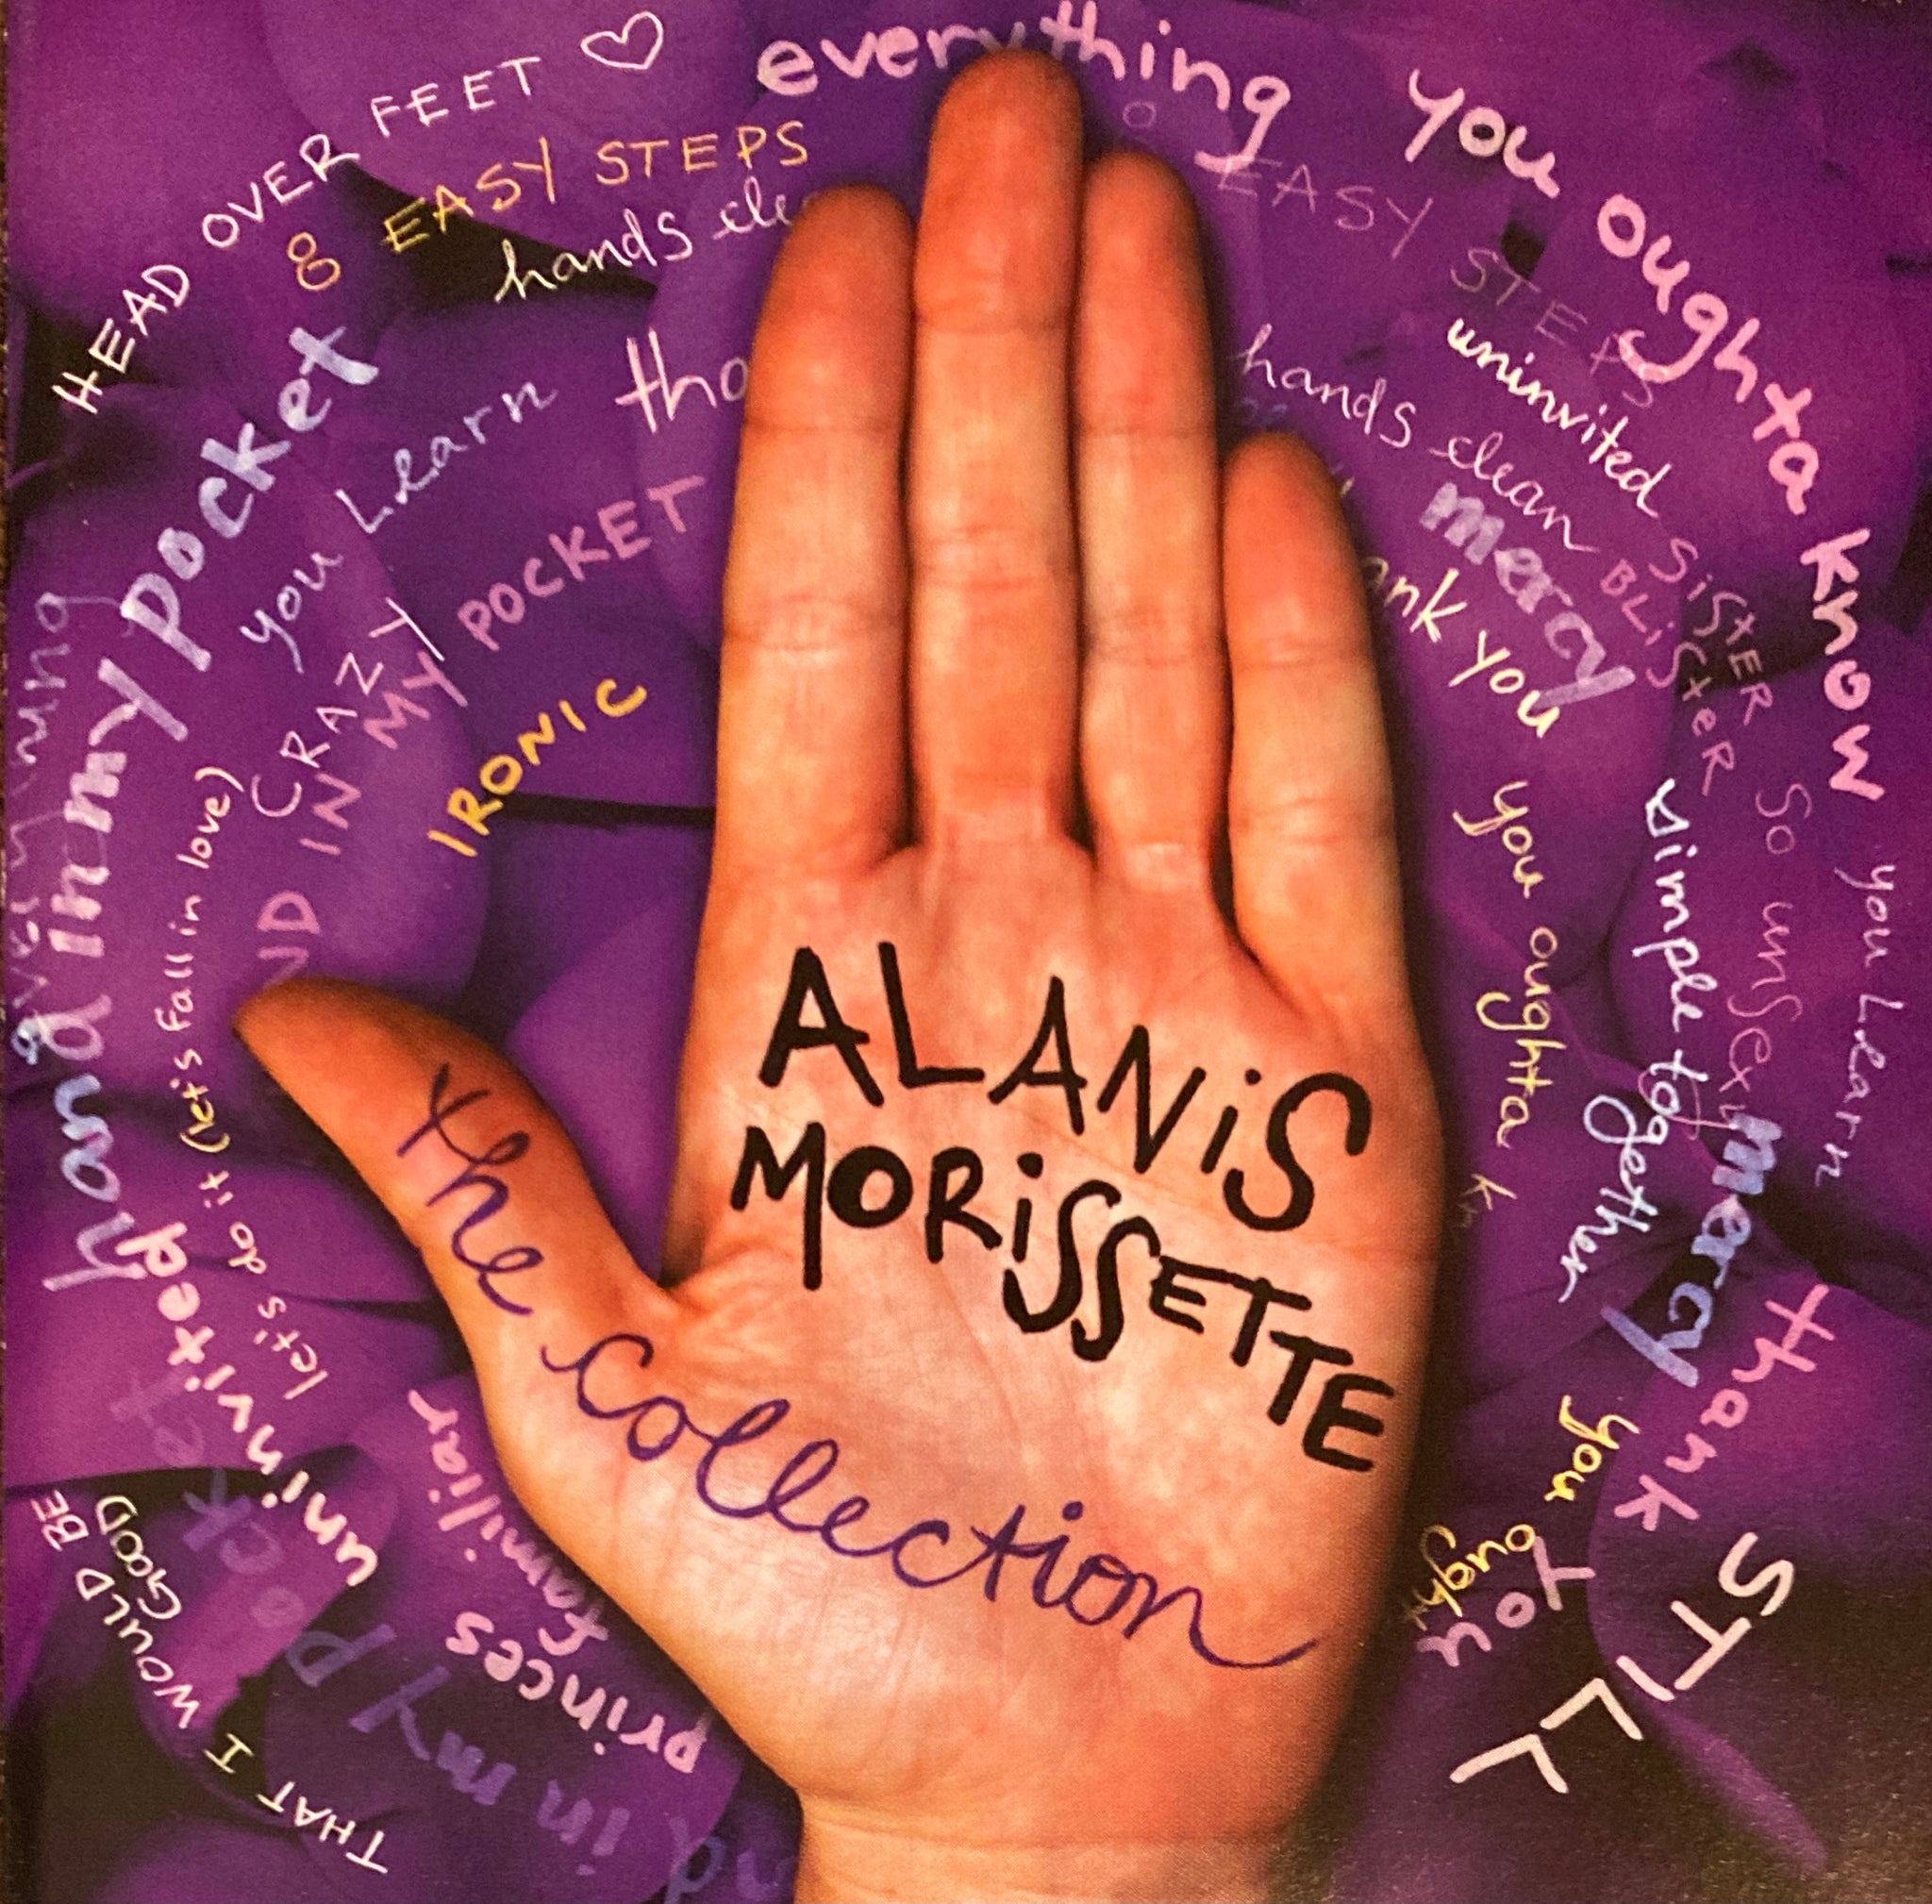 Alanis Morissette "The Collection" CD (2005)